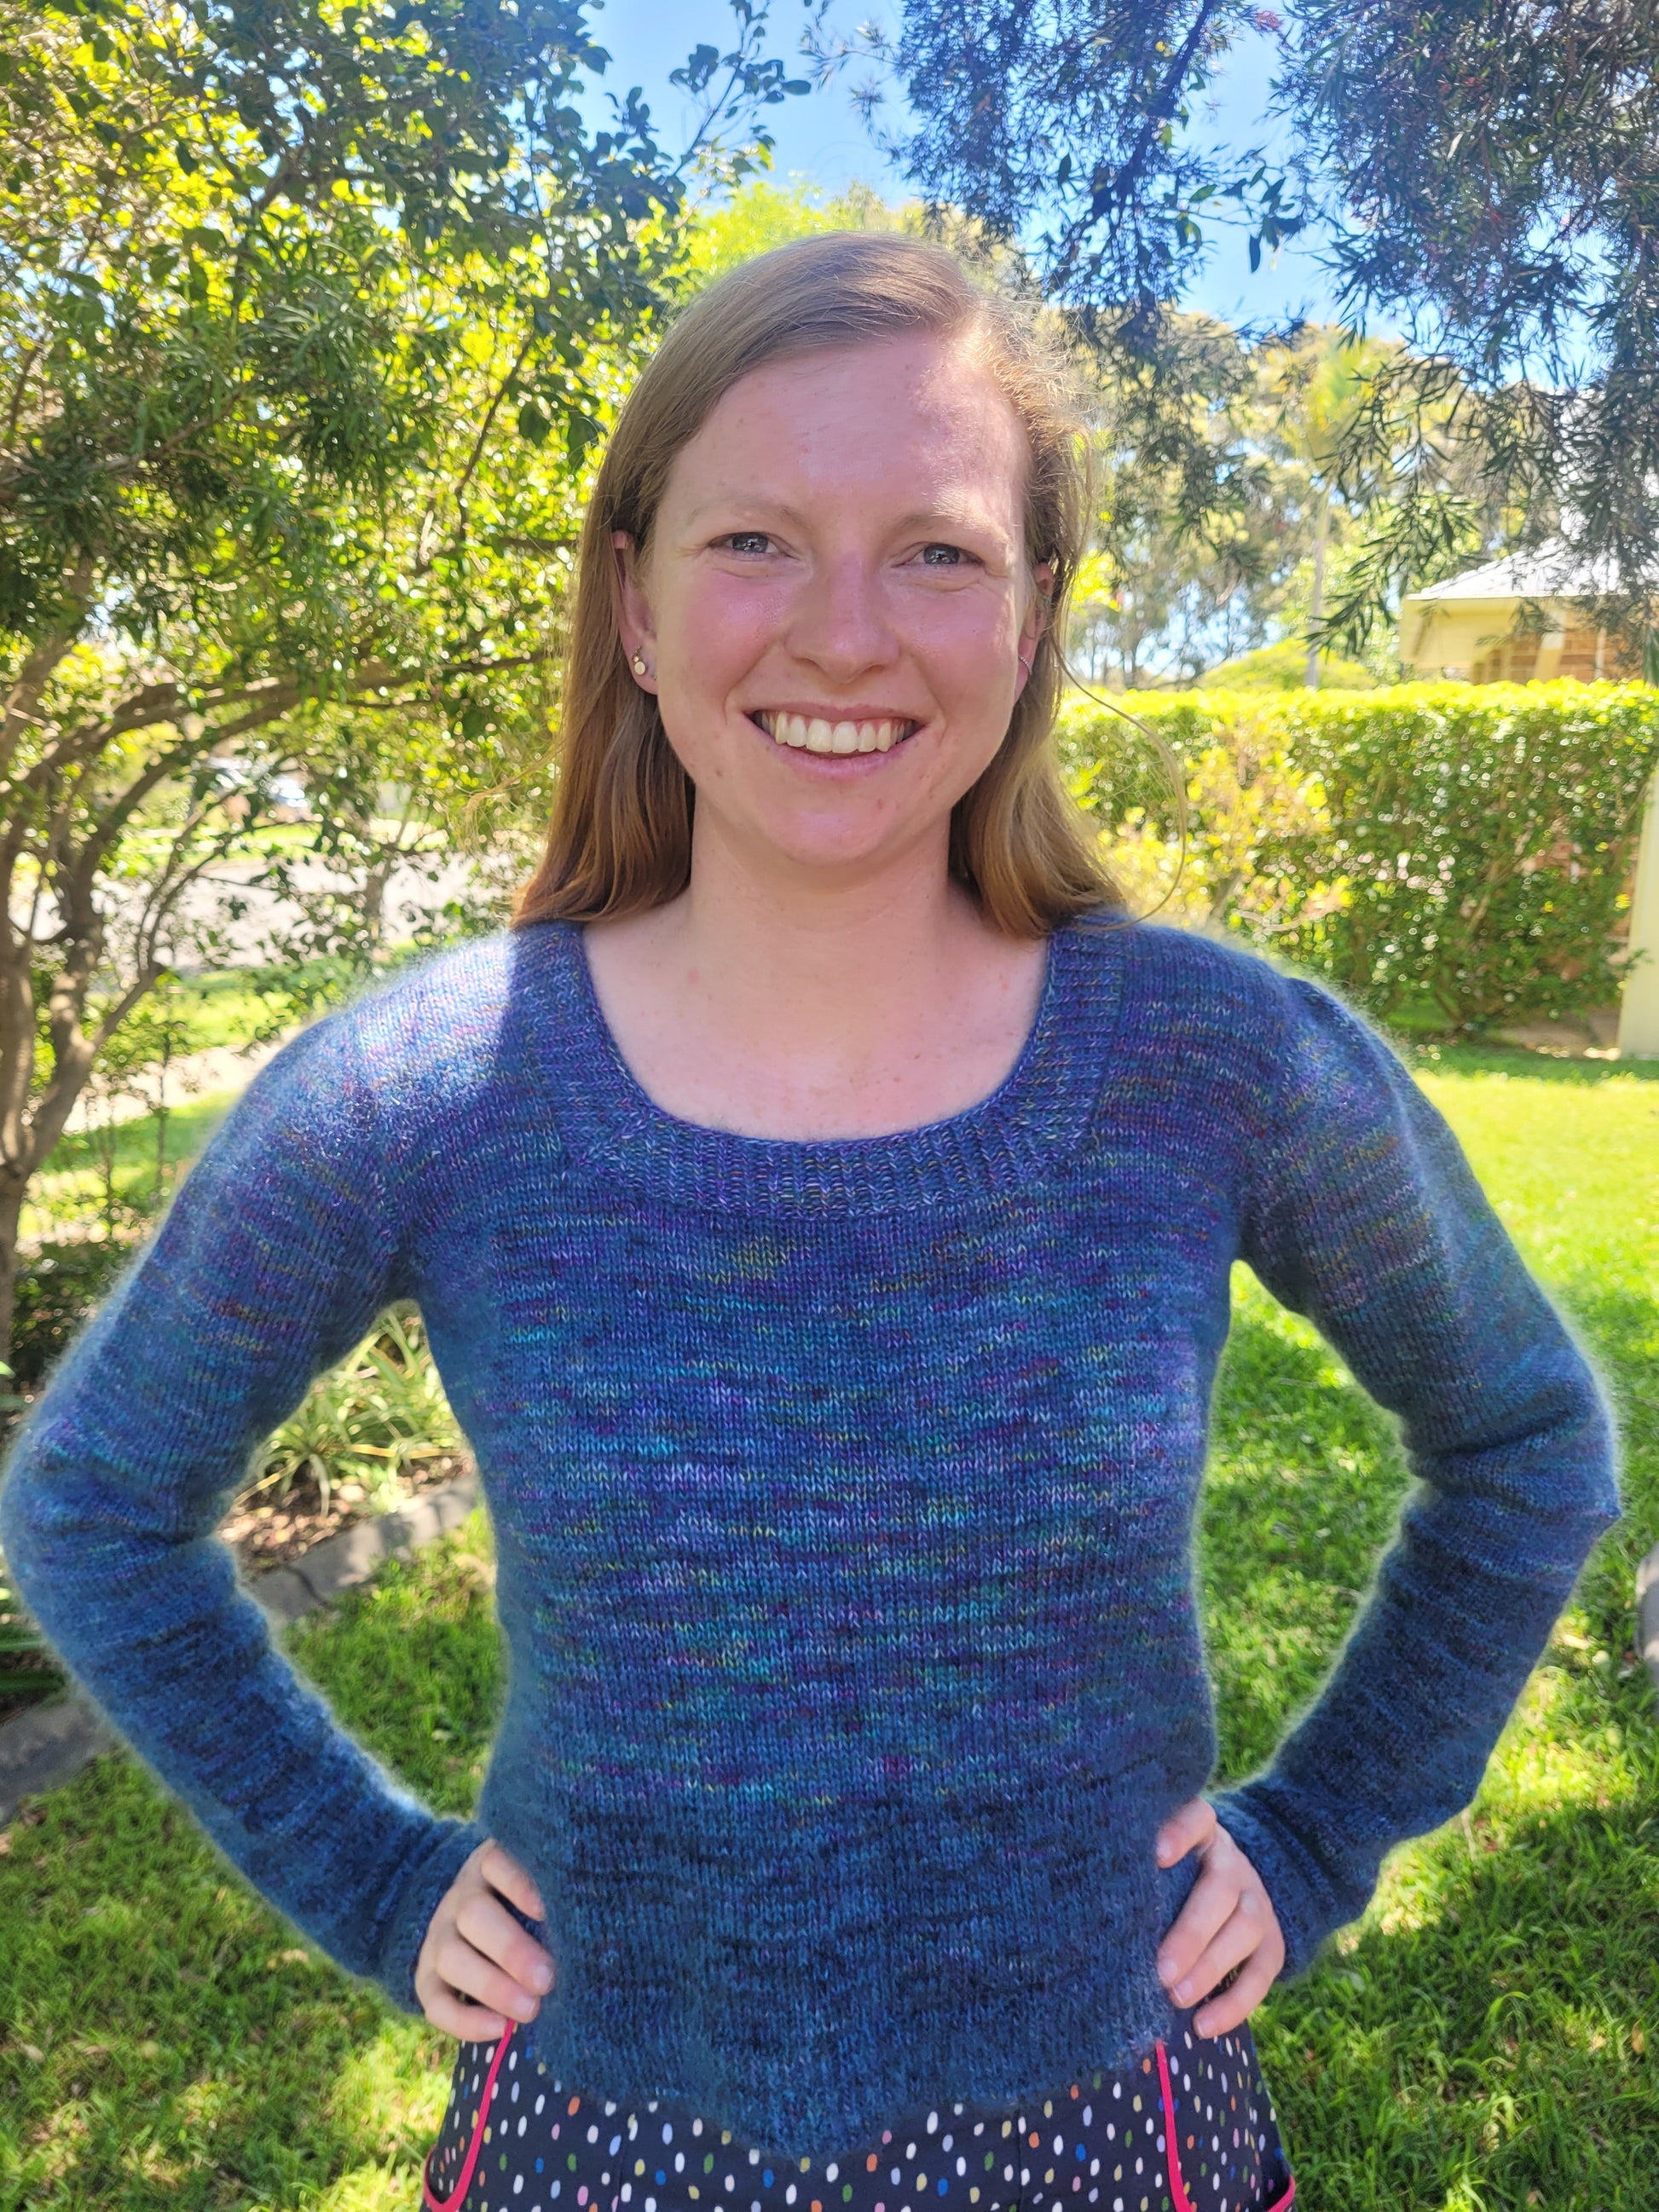 Ellen stands outside, smiling at the camera. She wears a blue sweater, knit with a square neck and gathered sleeves. The yarn has a slight halo to it, which shines in the sun.